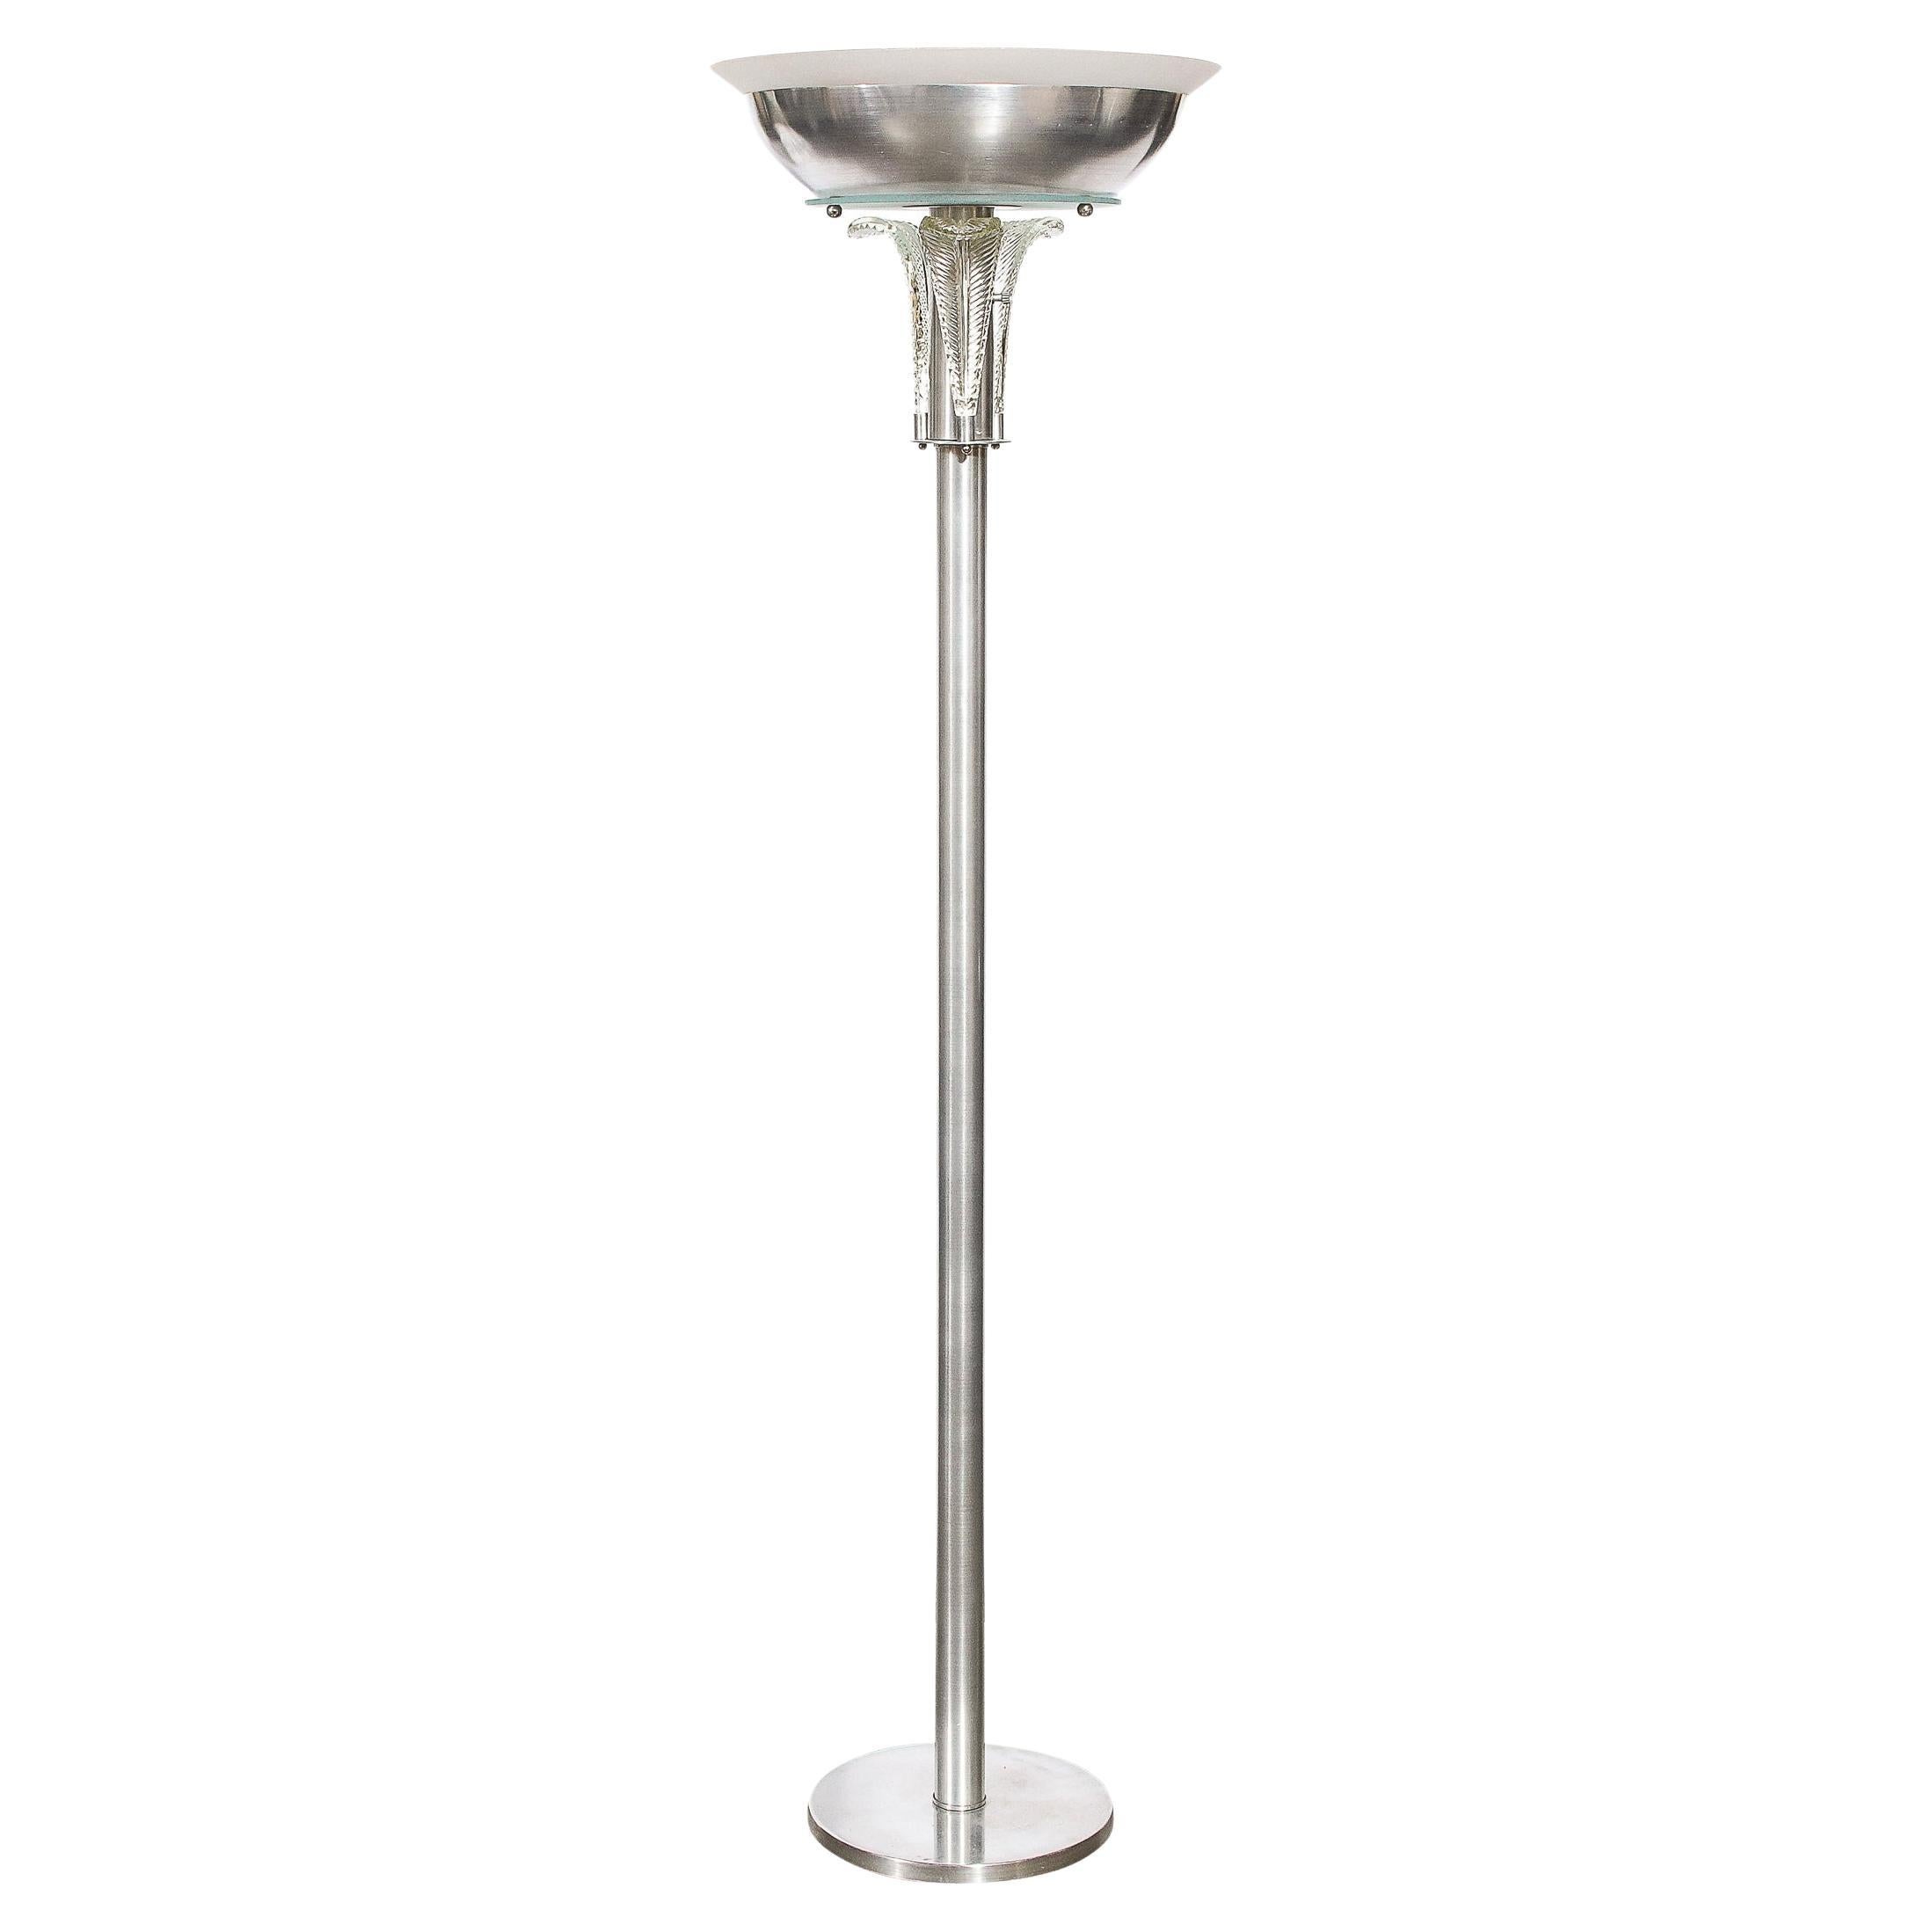 Art Deco "Palma" Torchiere in Glass & Brushed Aluminum by Walter Von Nessen